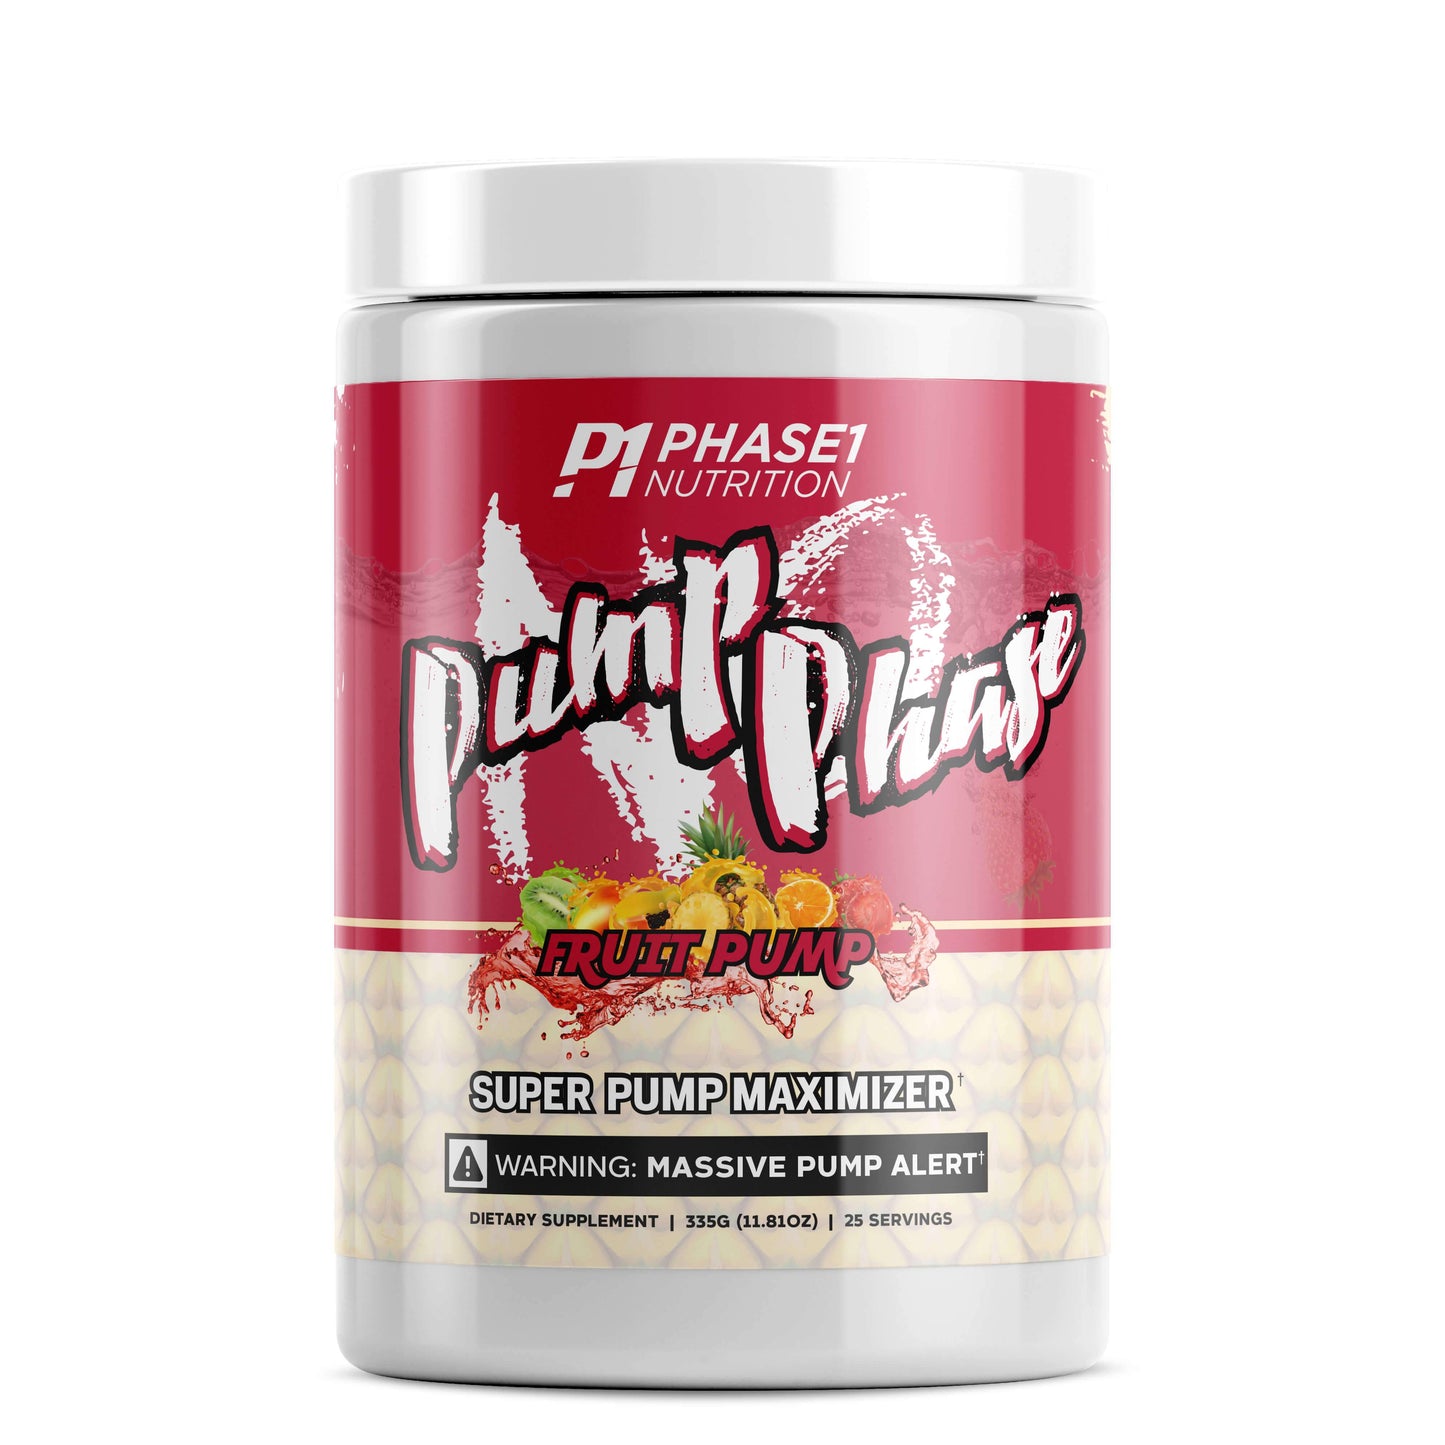 Phase One Nutrition Pump Phase